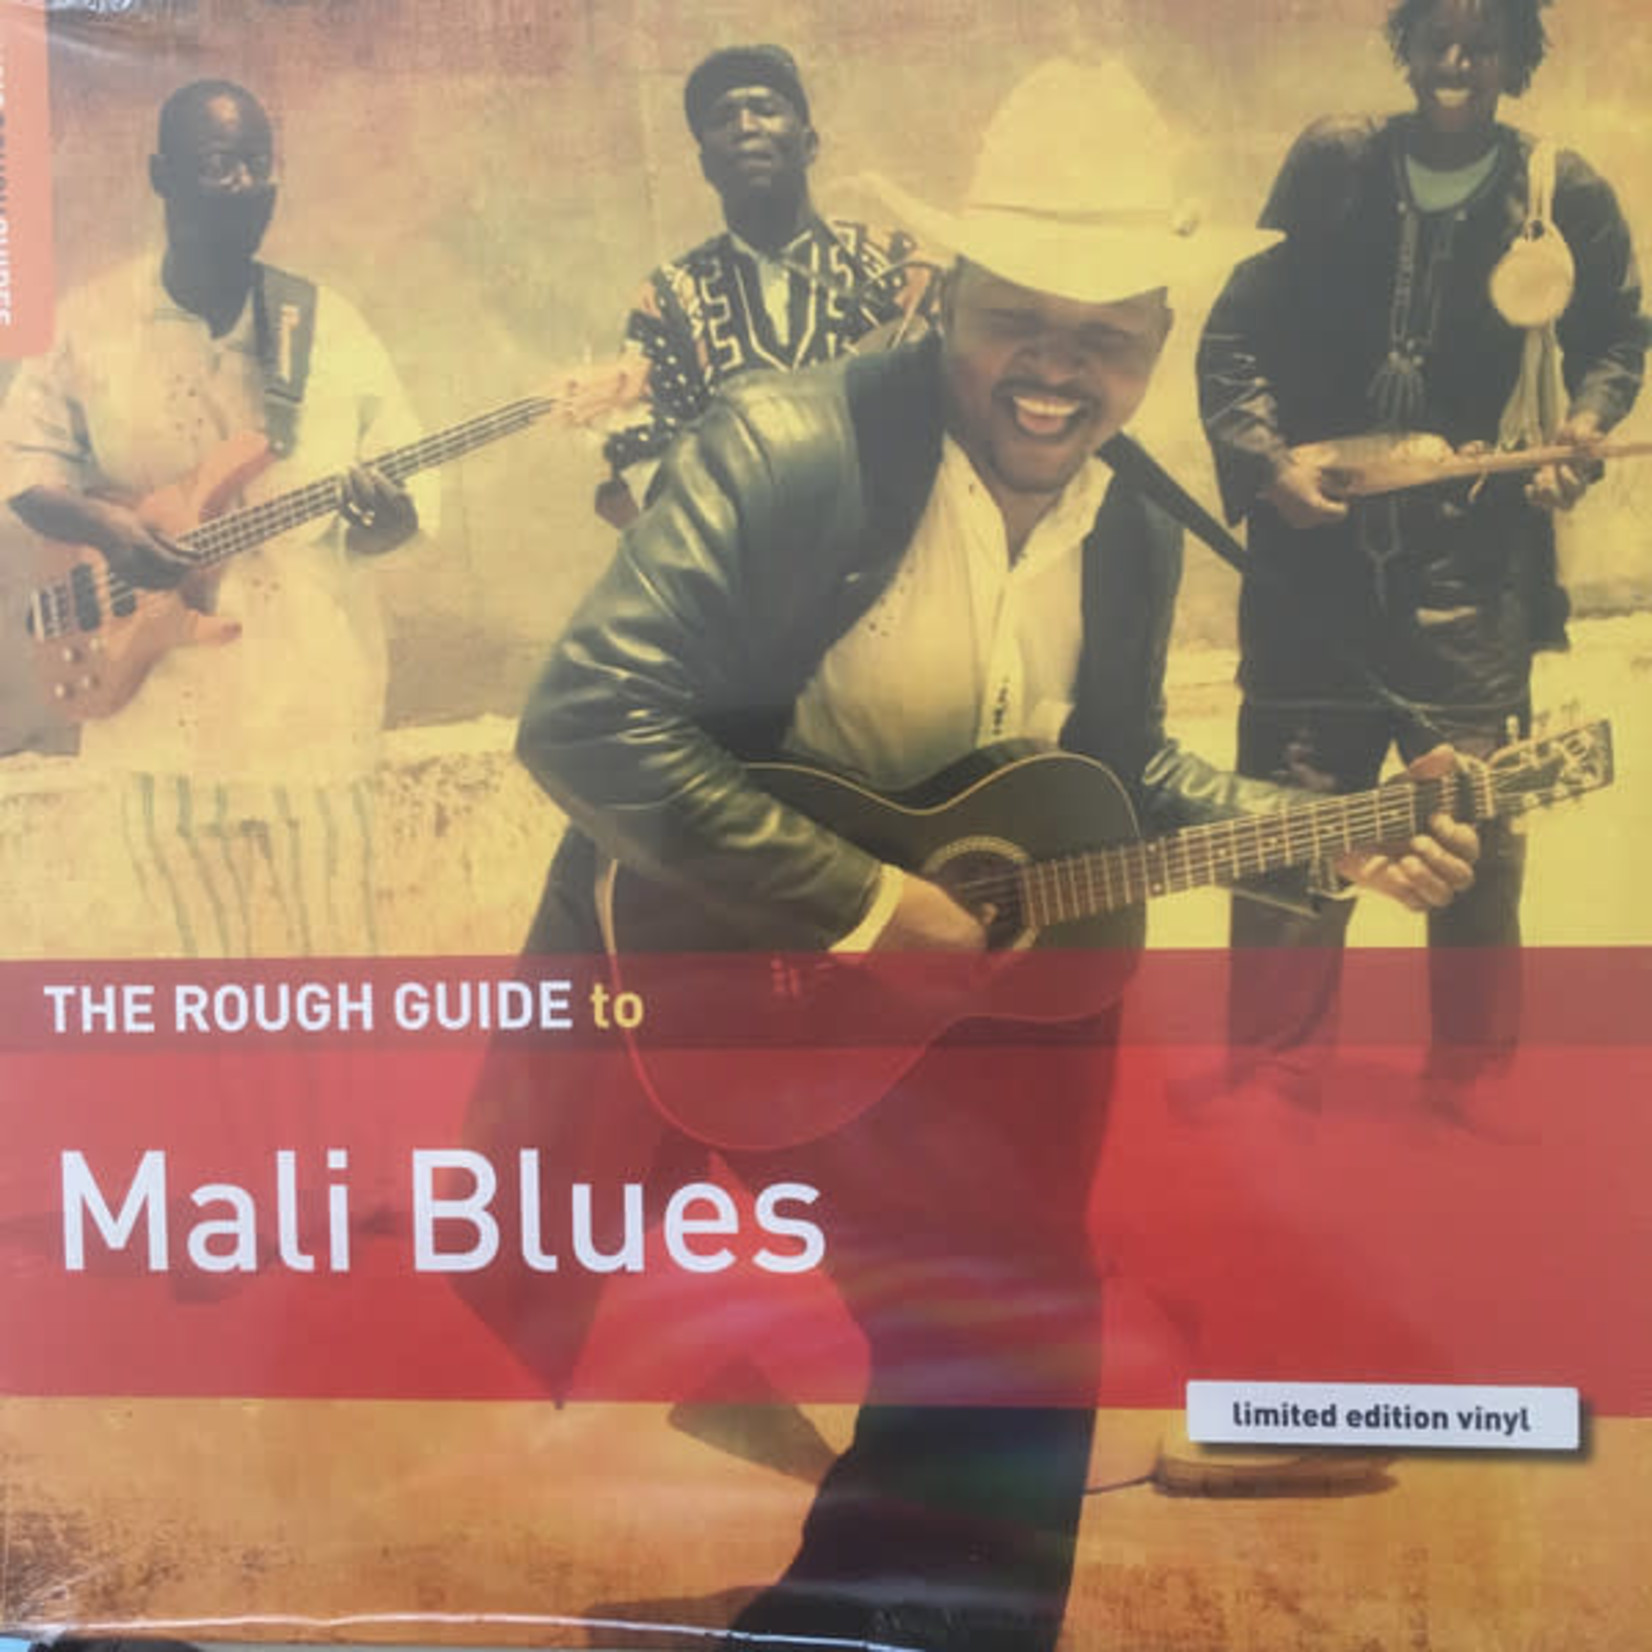 Rough Guide V/A - The Rough Guide to Mali Blues (LP)